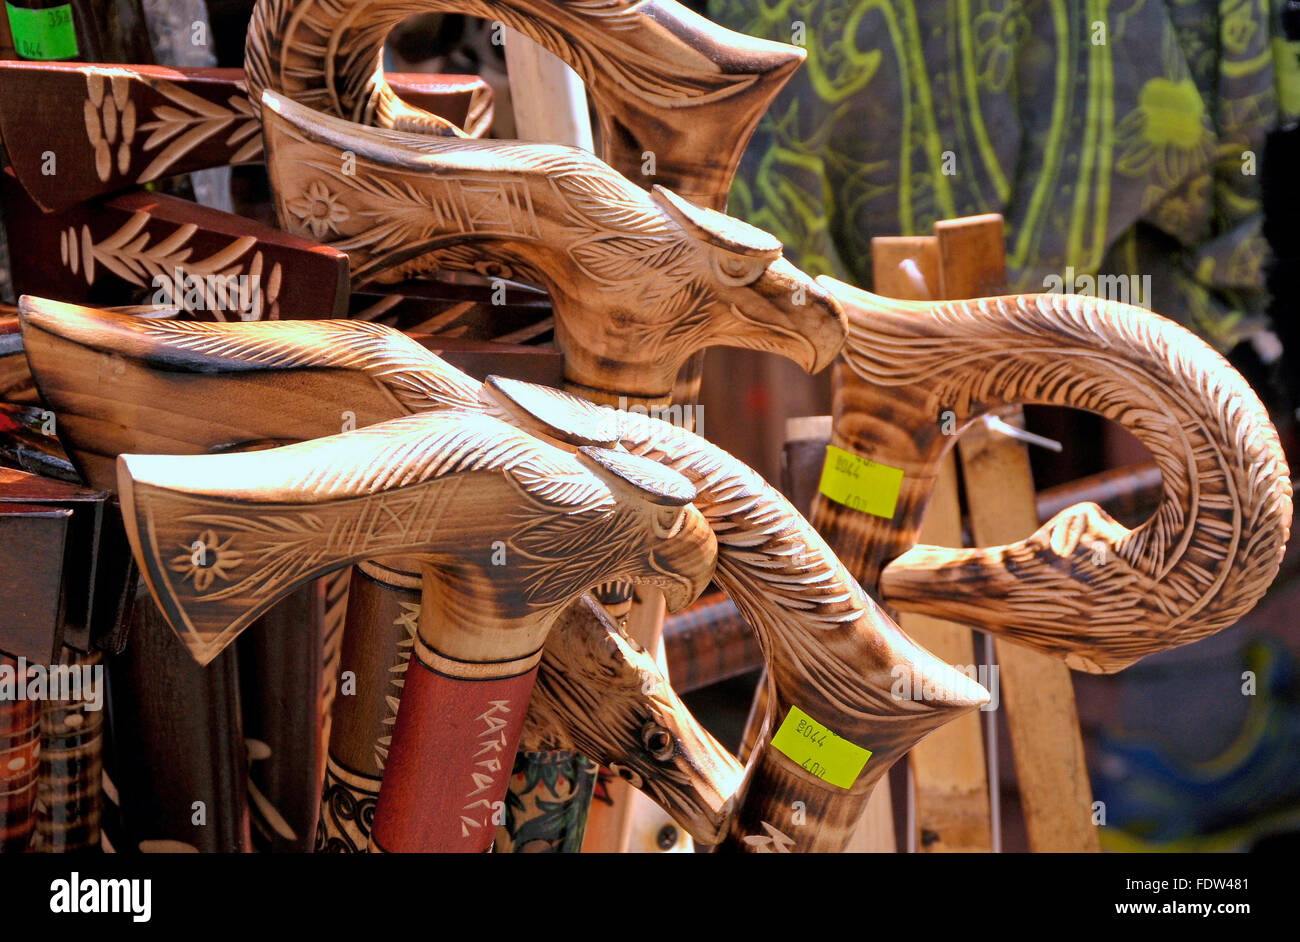 Souvenir stall with wooden handmade walking sticks with eagle shaped handle in Karpacz, Poland Stock Photo